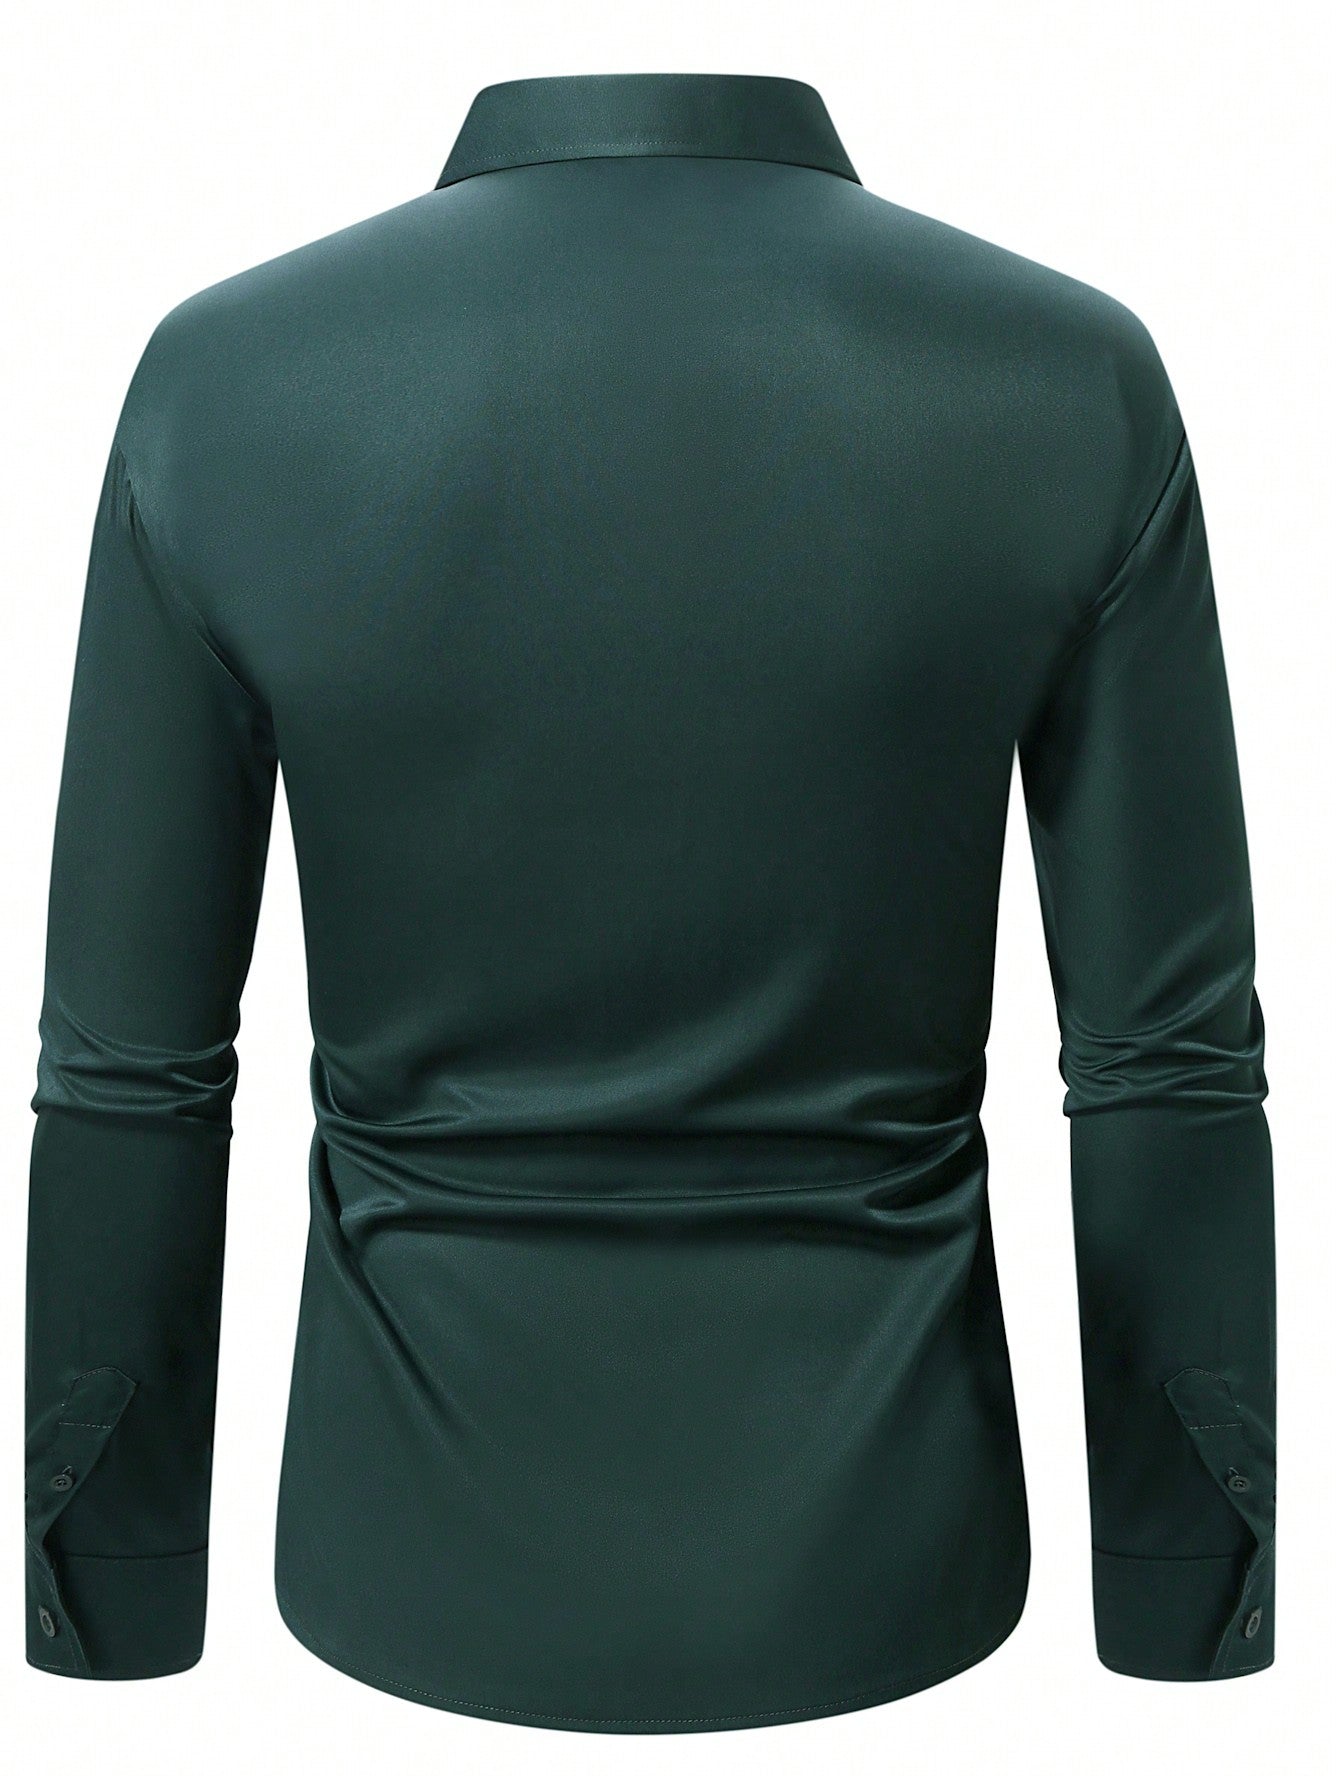 Manfinity Mode Men's Solid Color Long Sleeve Shirt